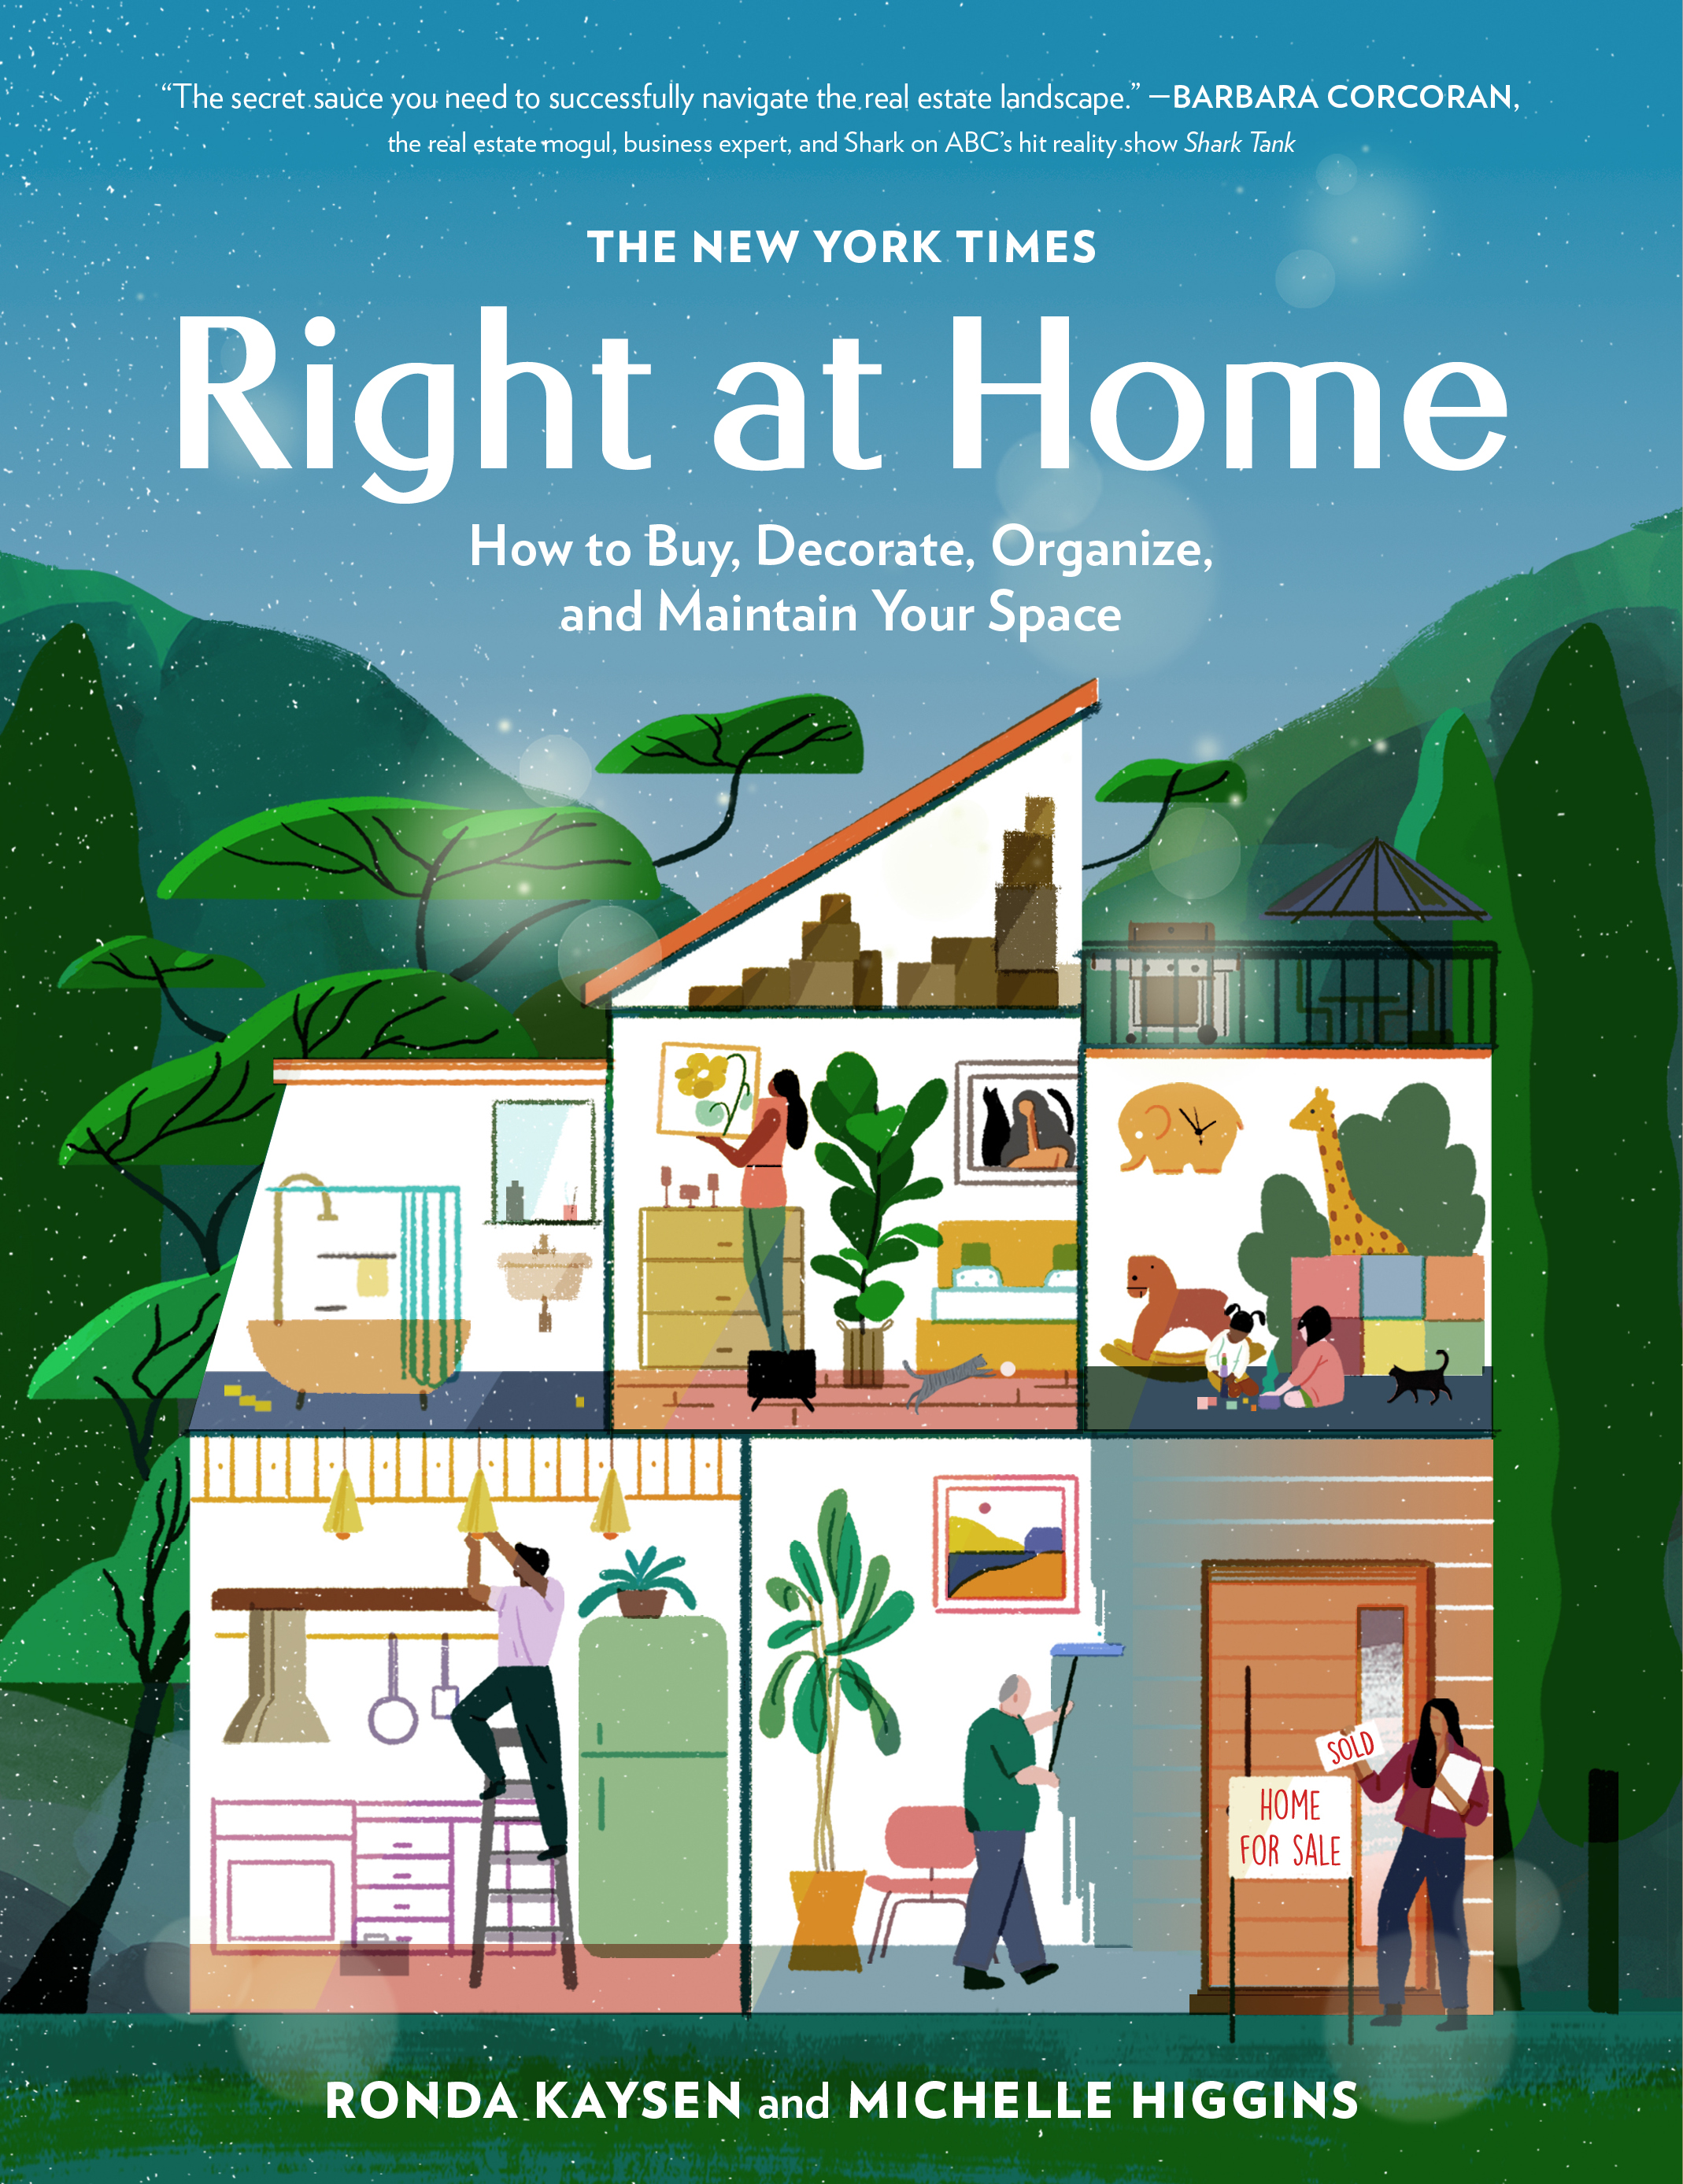 Book Launch: The New York Times' Right At Home by Ronda Kaysen and Michelle Higgins (POSTPONED)